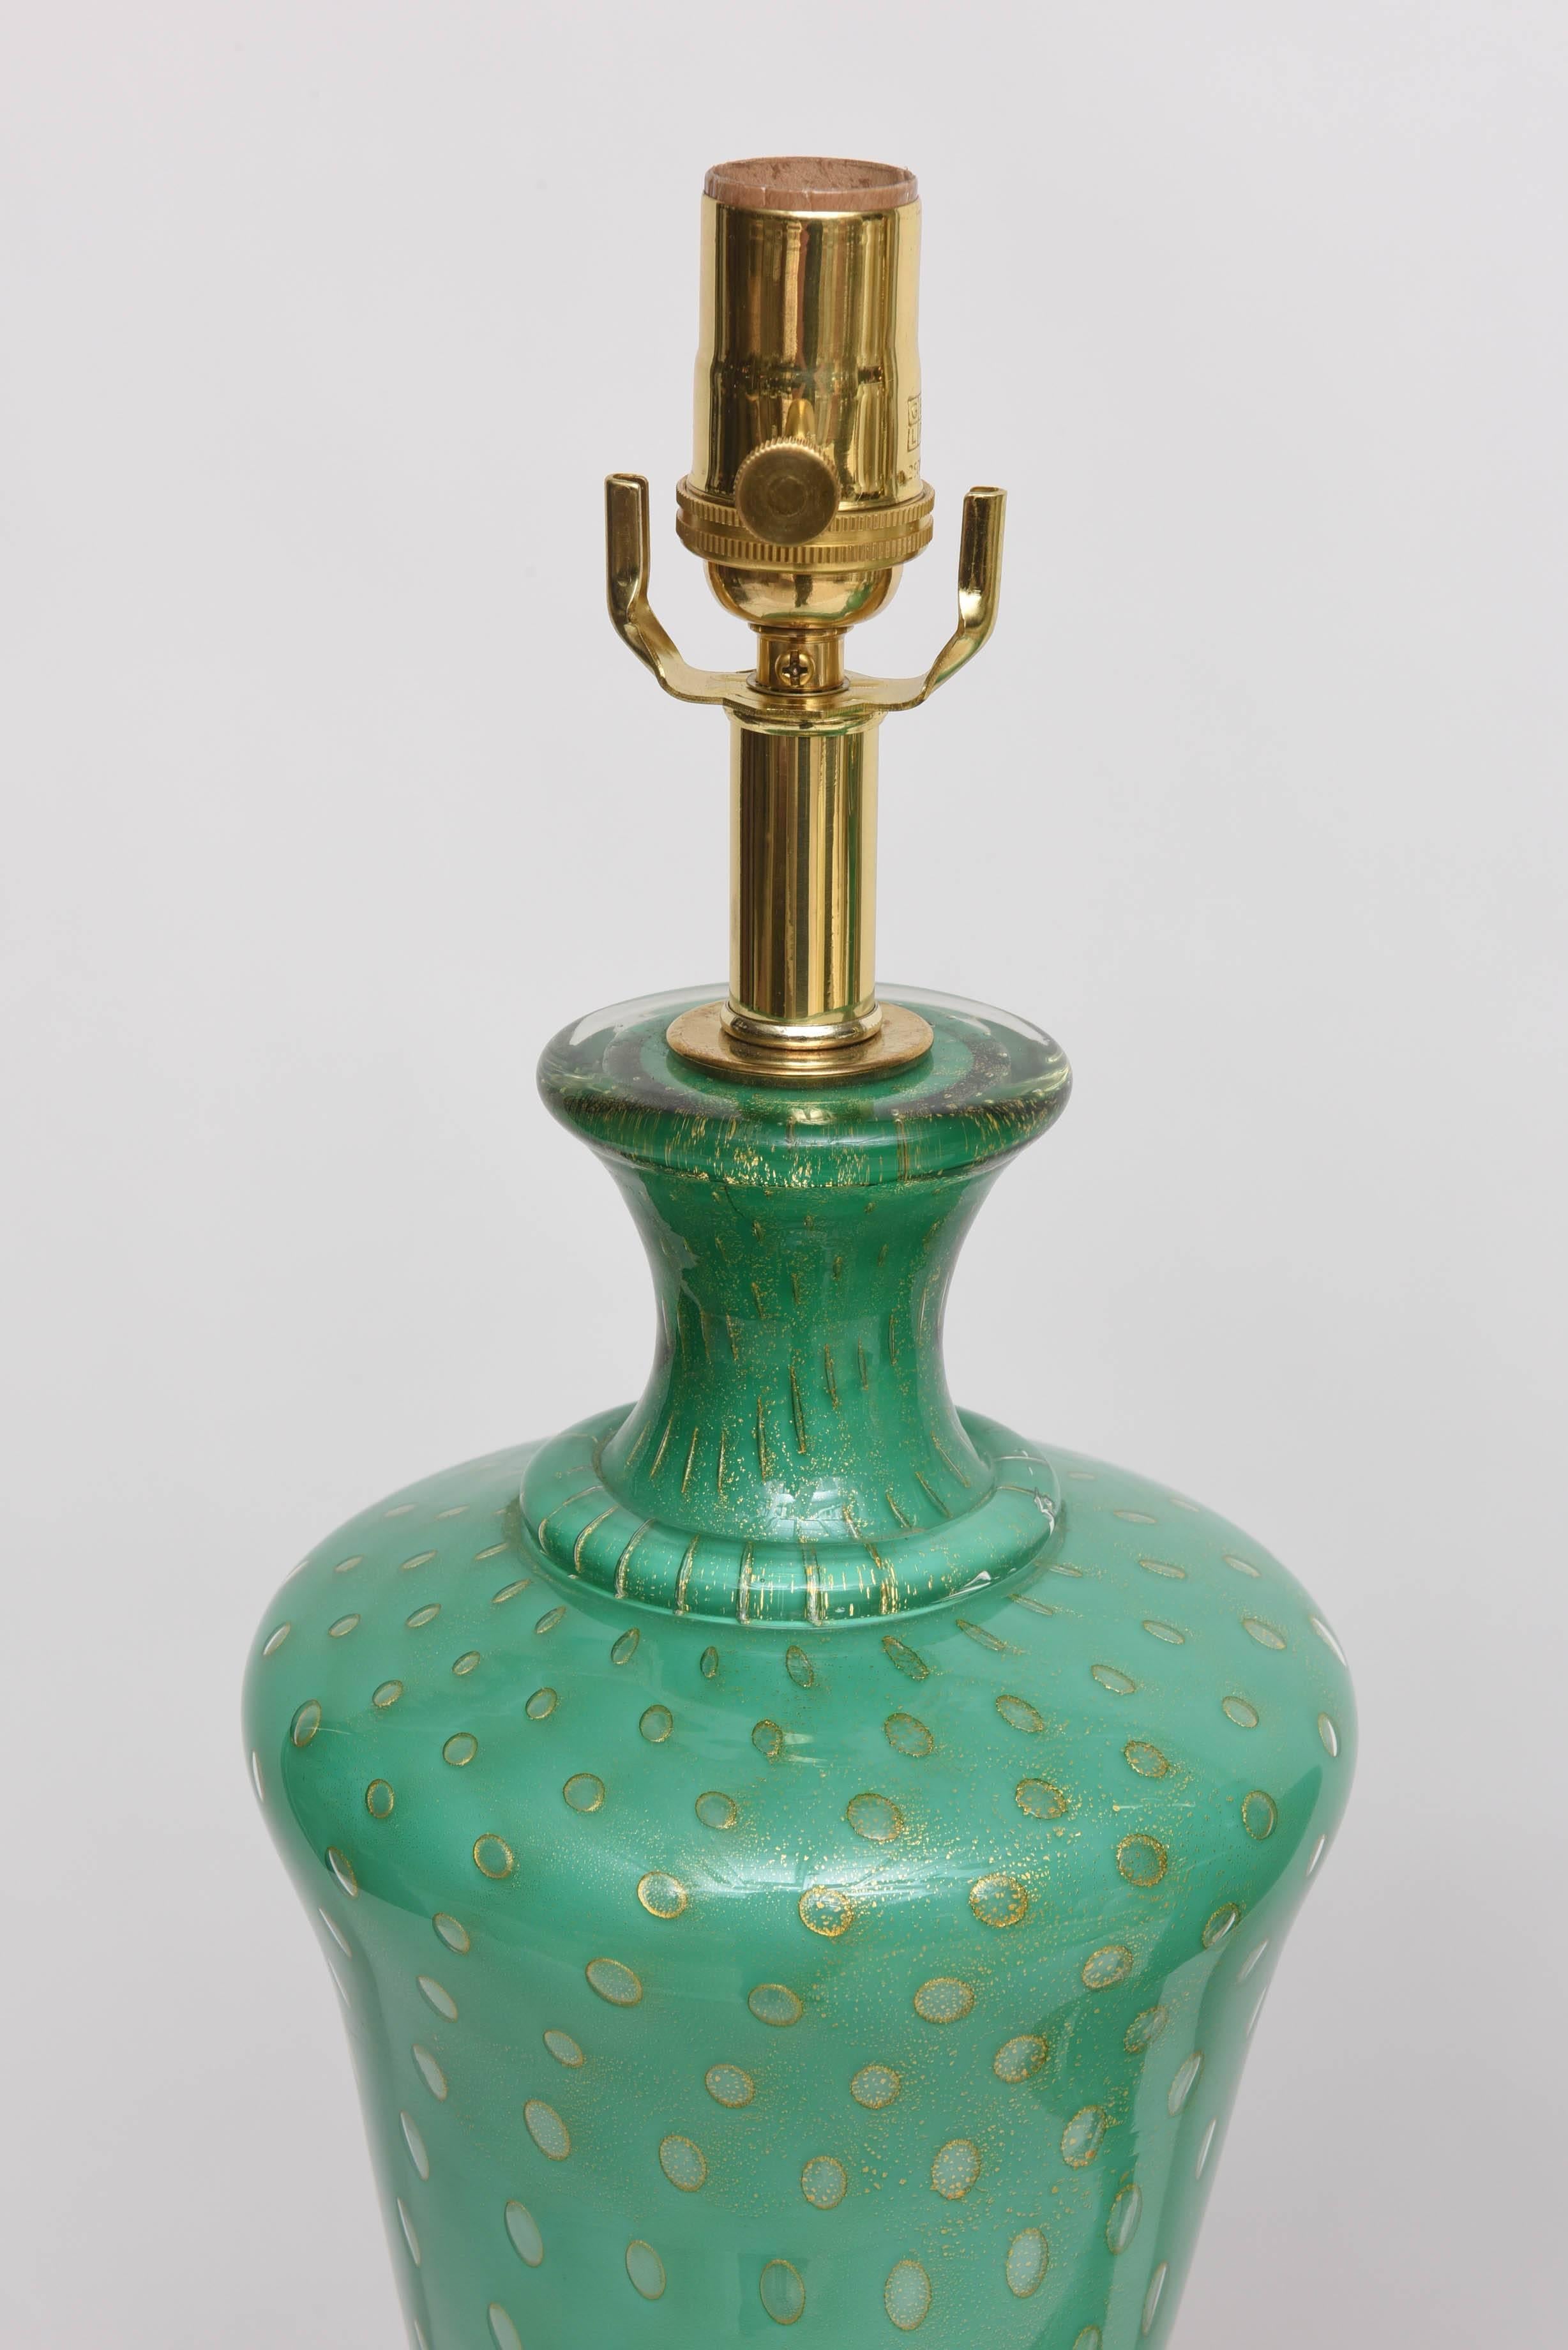 Urn-shaped pair of Barovier e Toso lamps. Stunning sea green Murano glass with controlled bubbles and gold leaf. Polished brass hardware with gold leaf bases. Newly U.S. wiring with fabric cord. No shades.